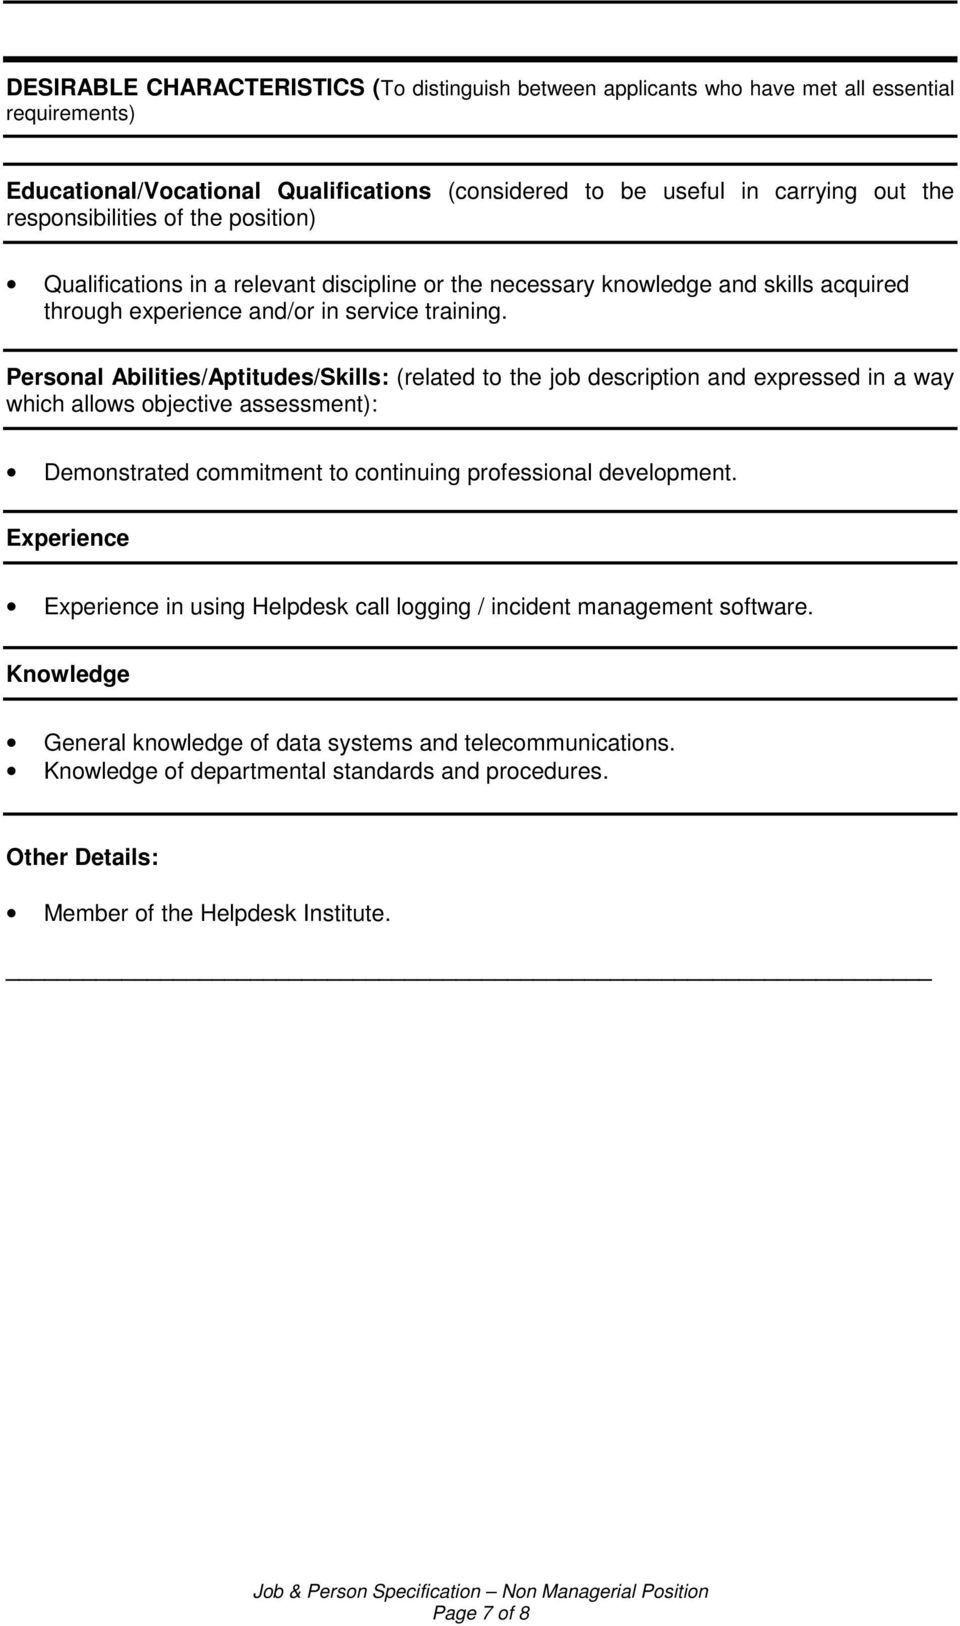 Personal Abilities/Aptitudes/Skills: (related to the job description and expressed in a way which allows objective assessment): Demonstrated commitment to continuing professional development.